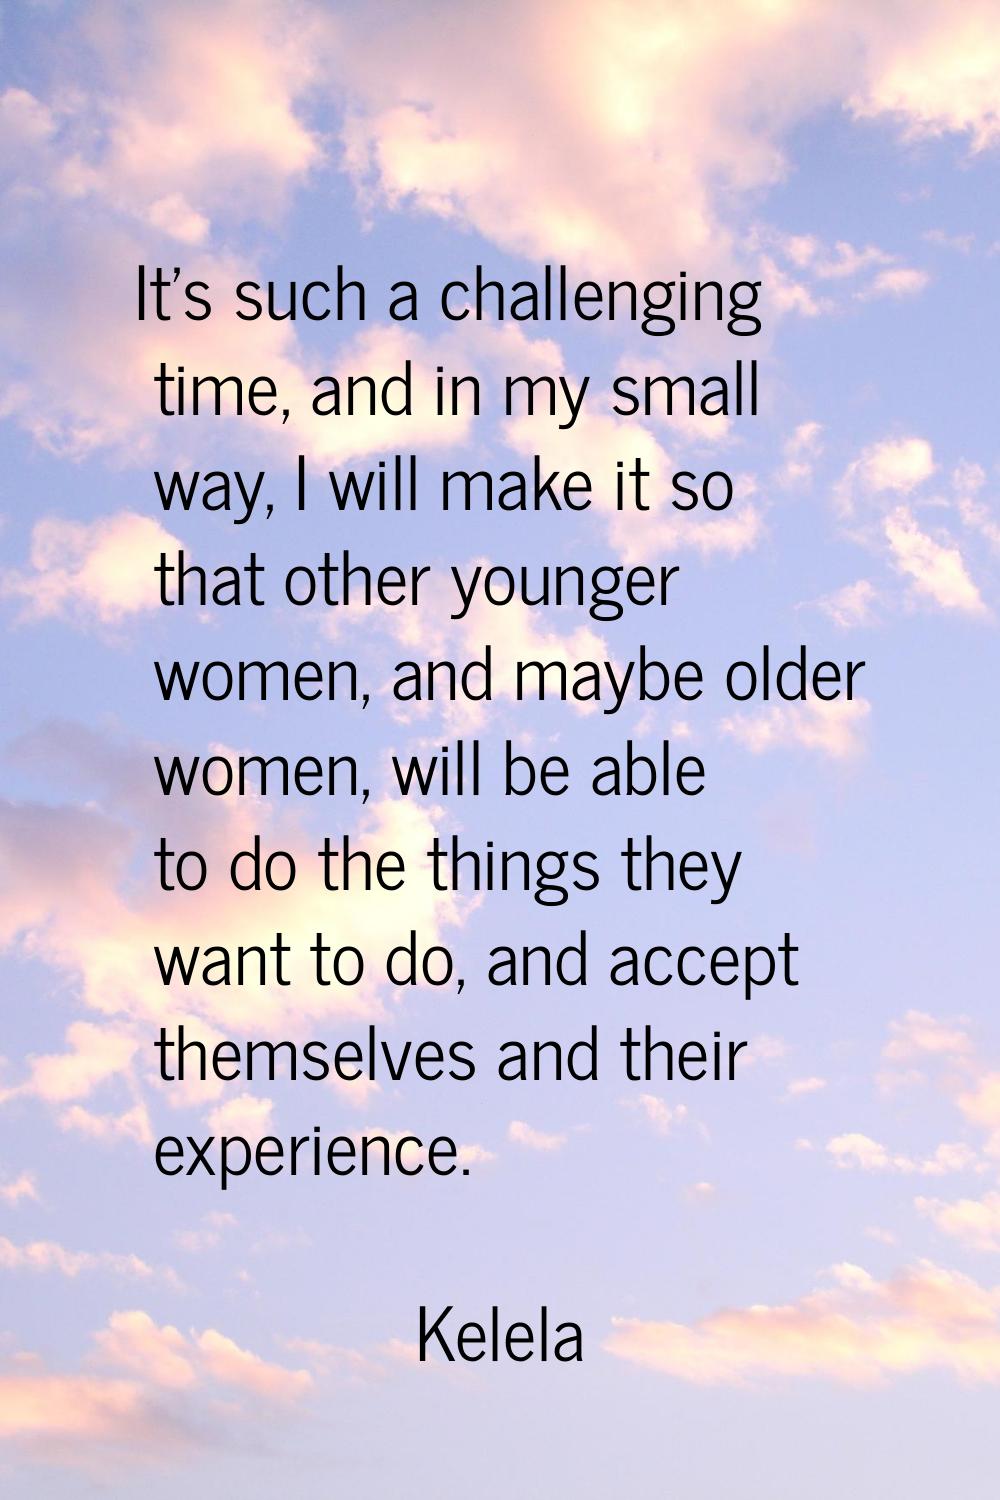 It's such a challenging time, and in my small way, I will make it so that other younger women, and 